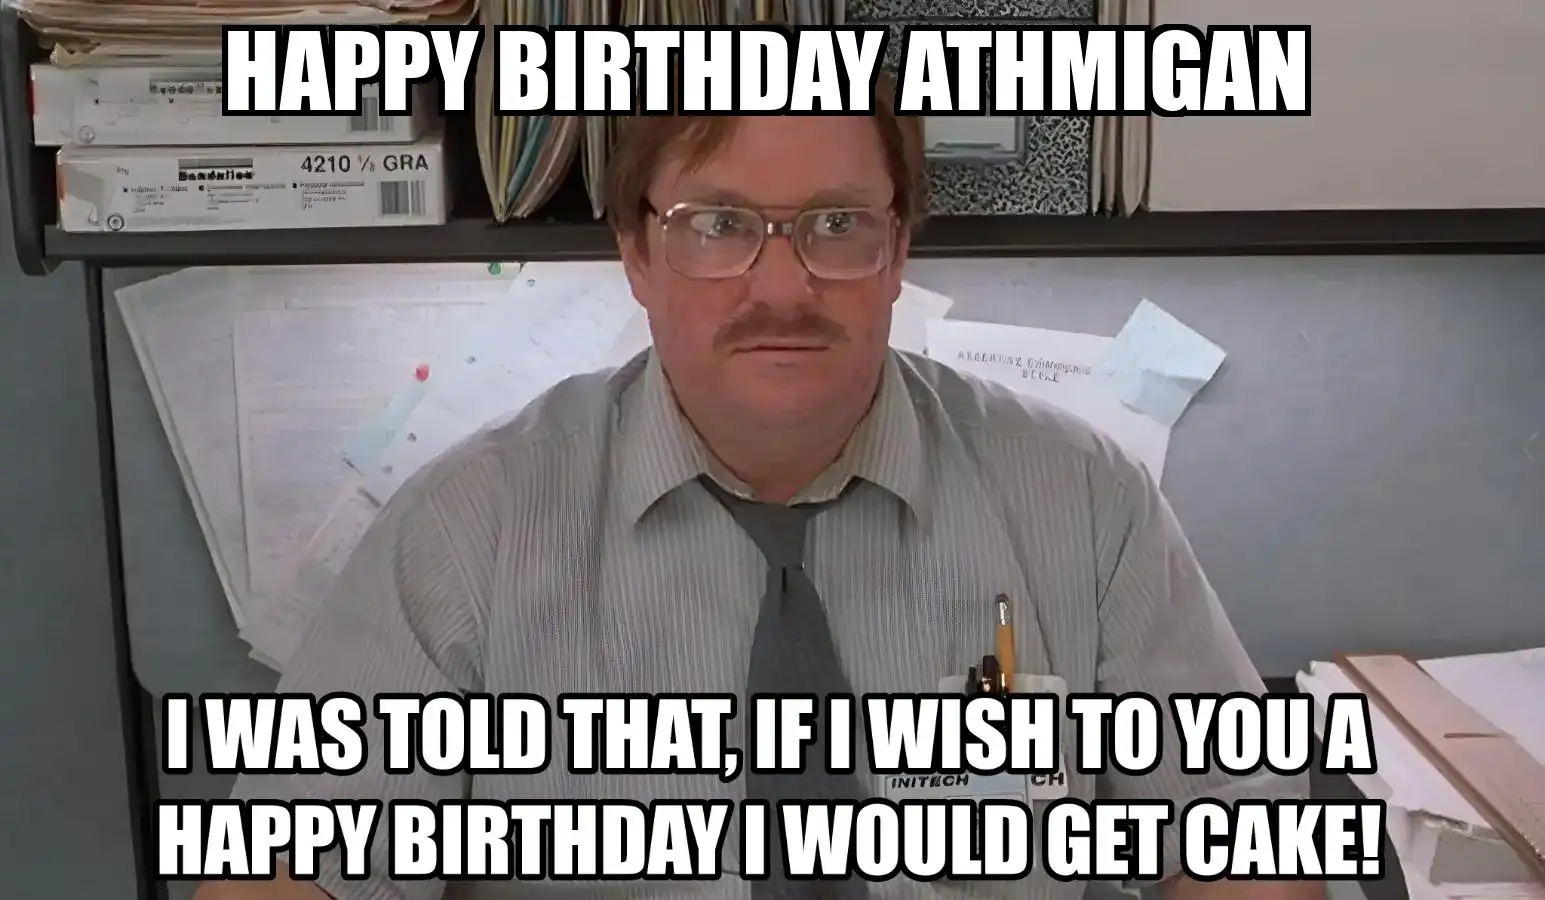 Happy Birthday Athmigan I Would Get A Cake Meme